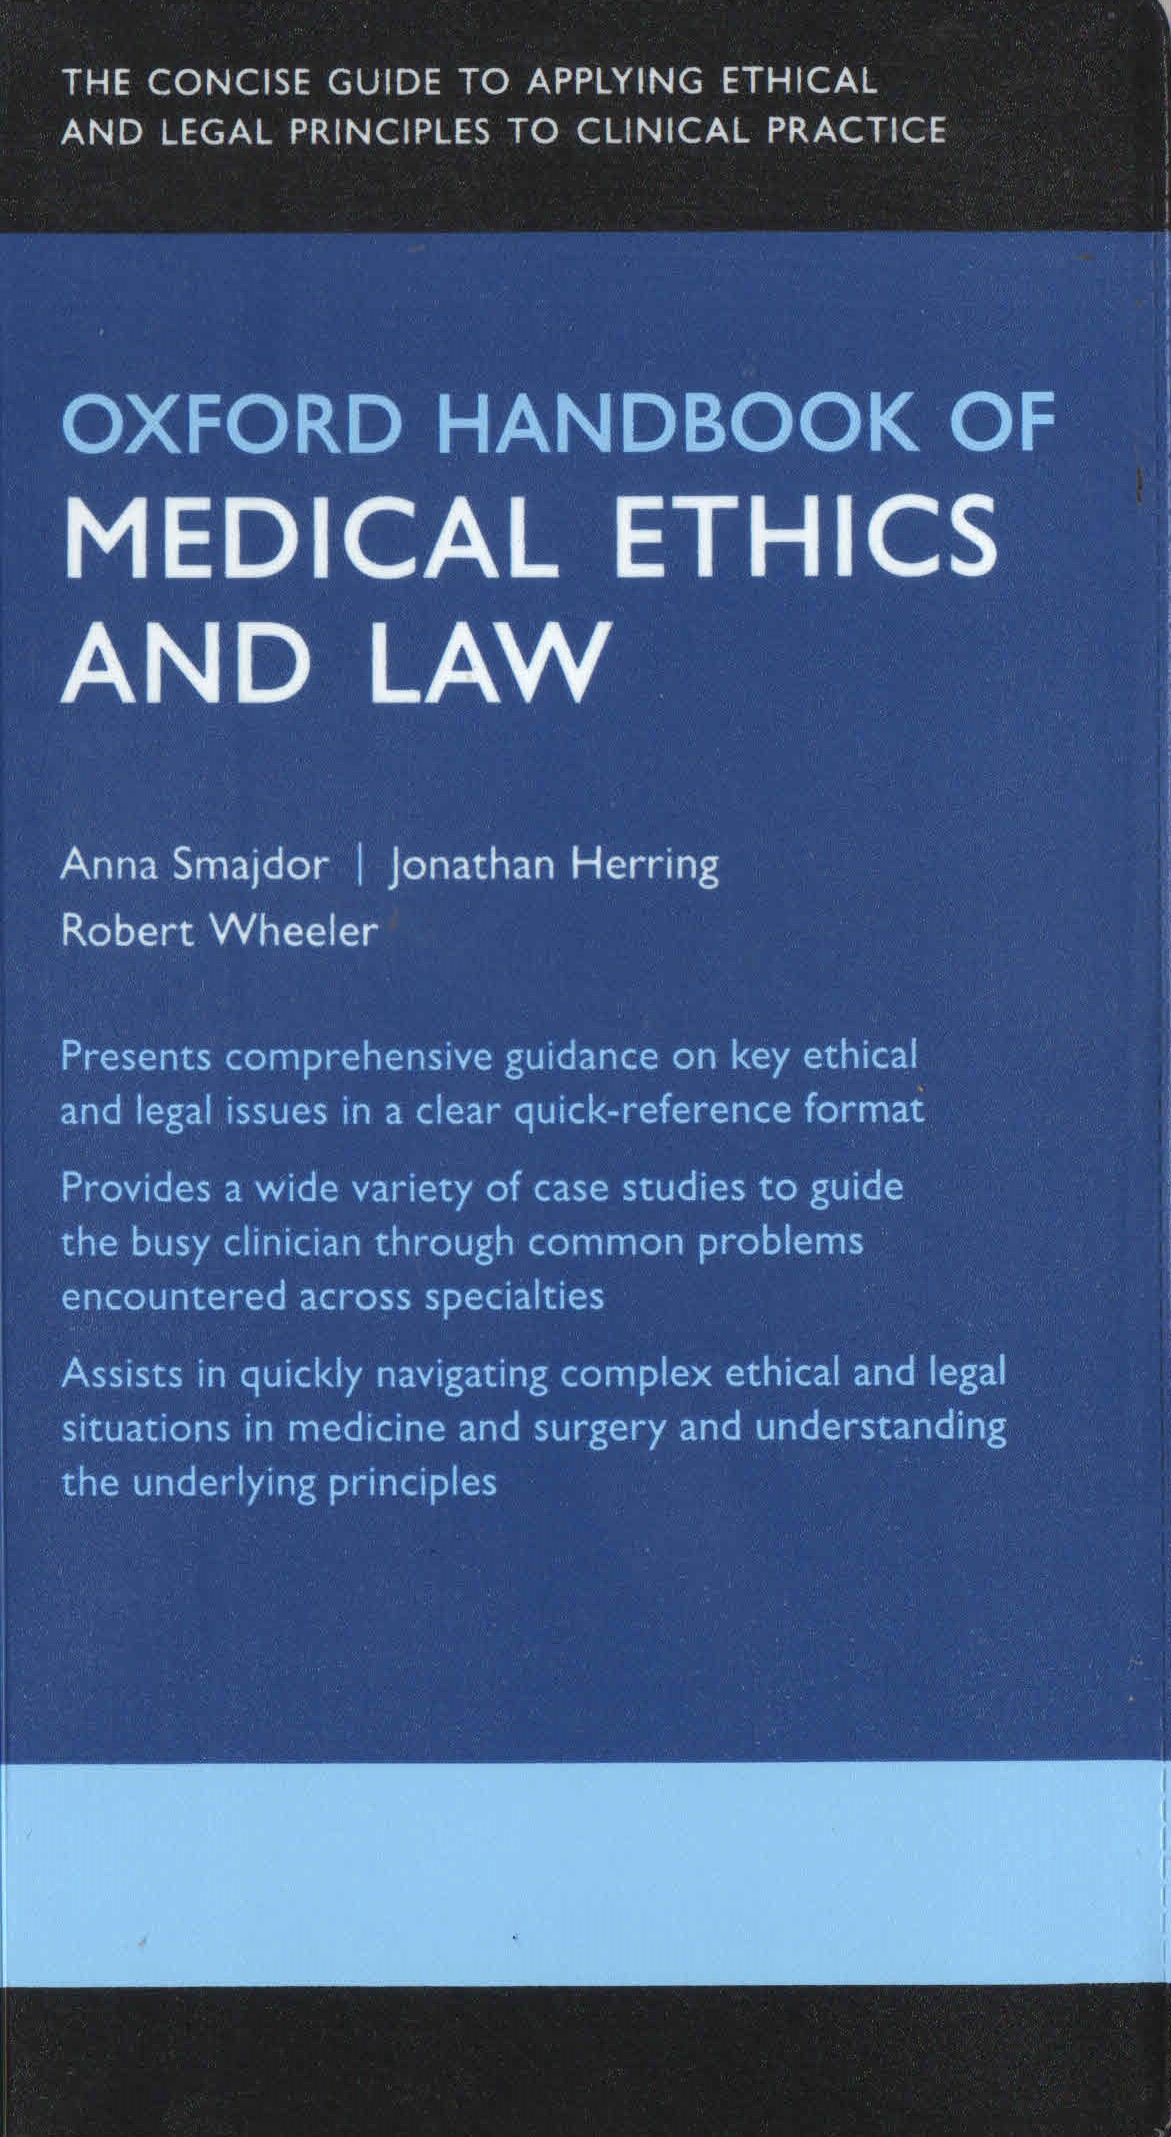 

exclusive-publishers/oxford-university-press/oxford-handbook-of-medical-ethics-and-law-9780199659425